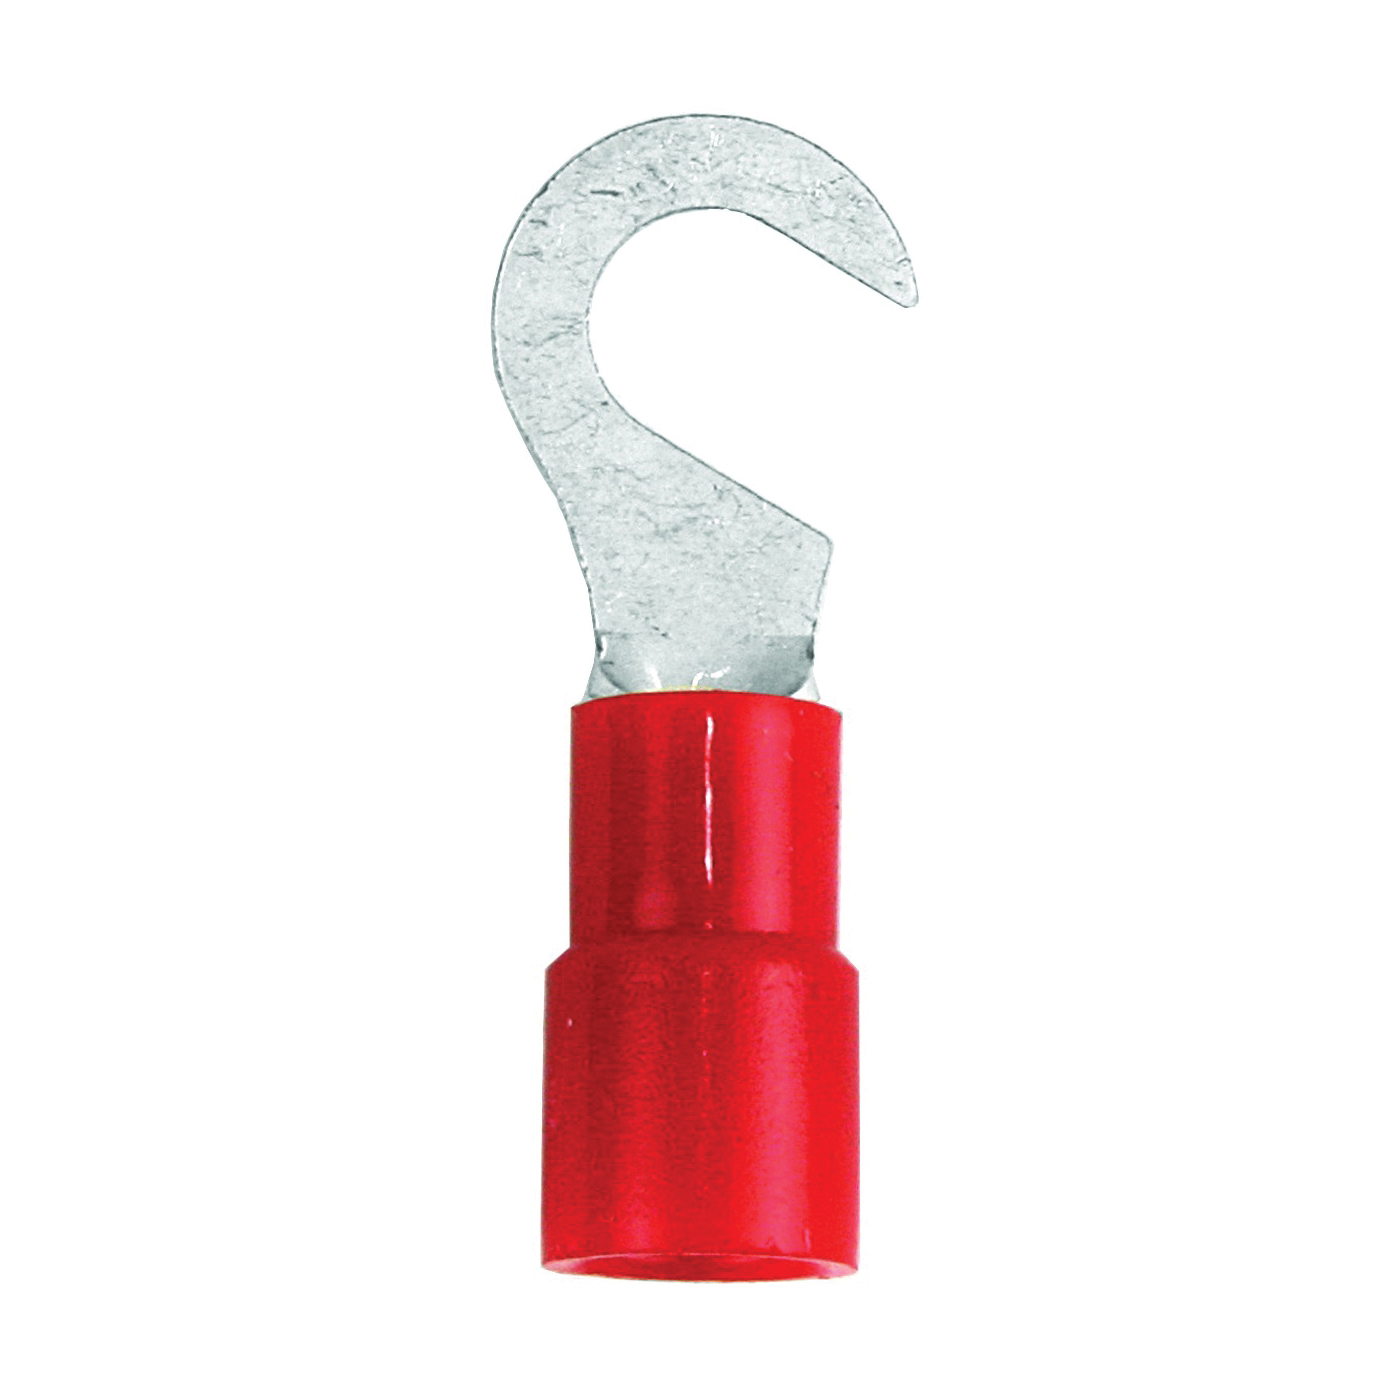 60959 Hook Terminal, 22 to 18 AWG Wire, #10 Stud, Vinyl Insulation, Red